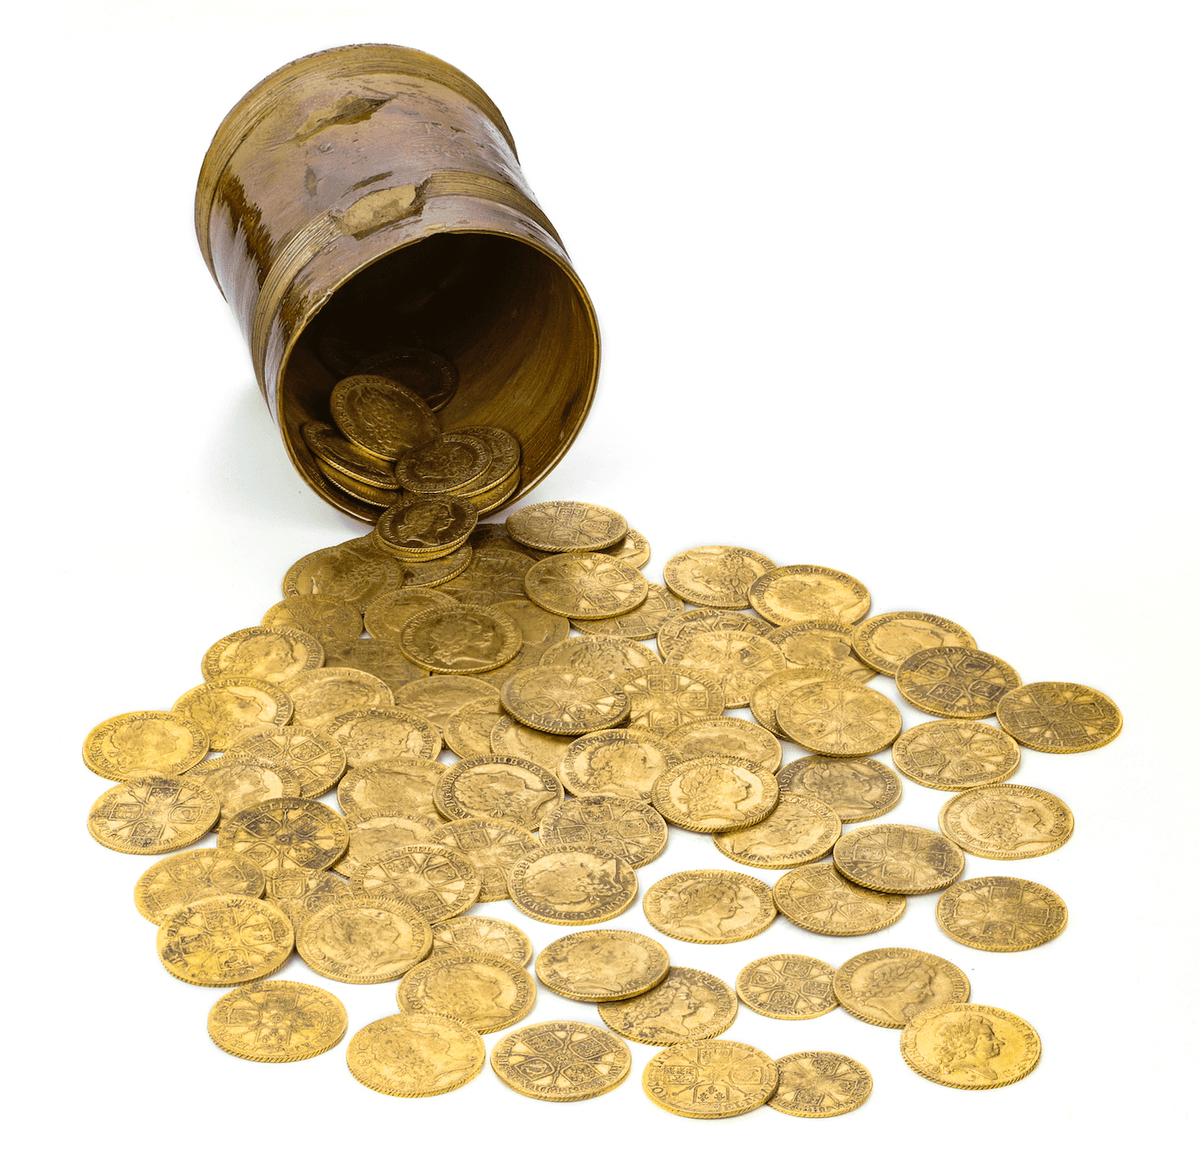 The Staffordshire-ware cup and King Charles I gold coins. (Courtesy of <a href="https://www.facebook.com/spink.auctions" target="_blank" rel="noopener">Spink & Son</a>)